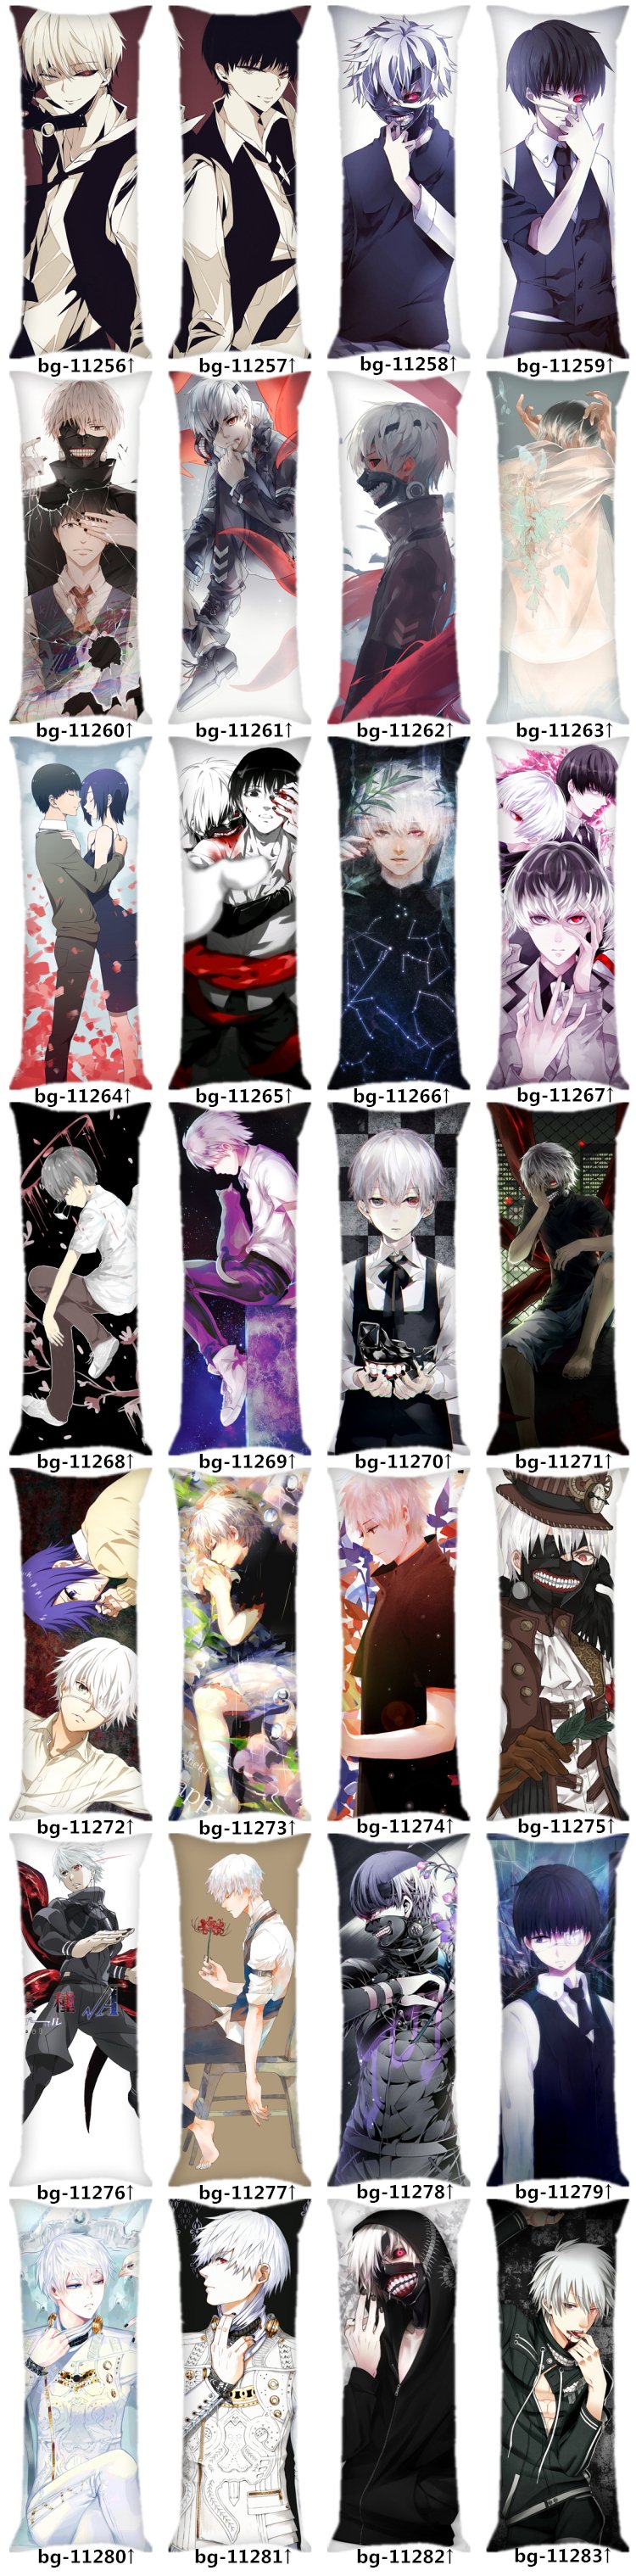 Tokyo Ghoul Body Pillow - Design Collection